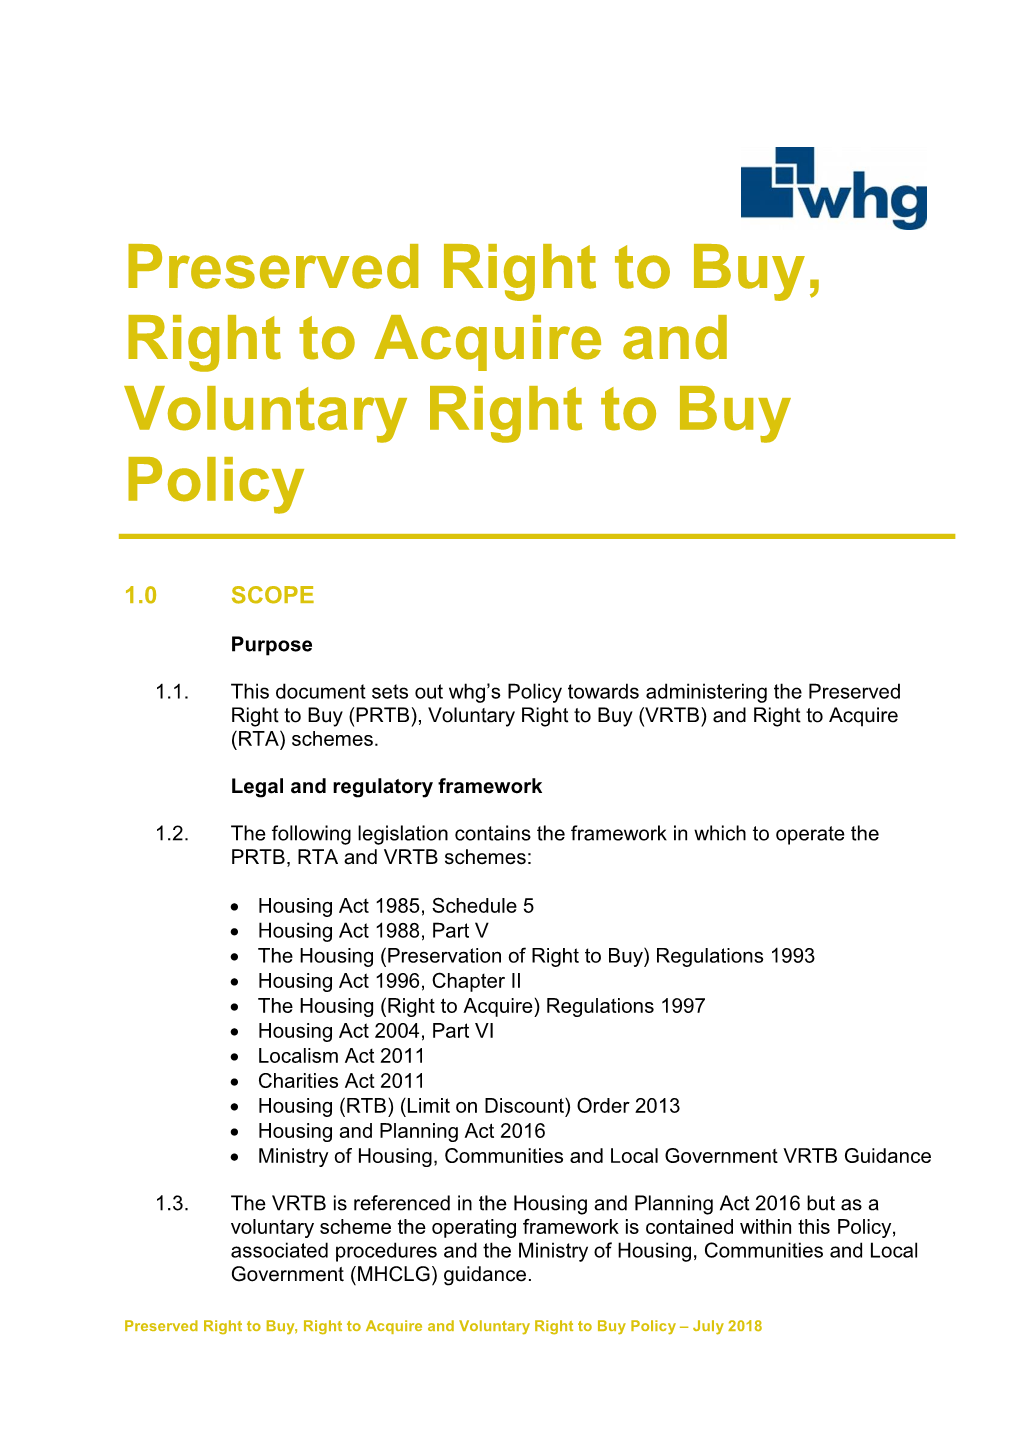 Preserved Right to Buy, Right to Acquire and Voluntary Right to Buy Policy